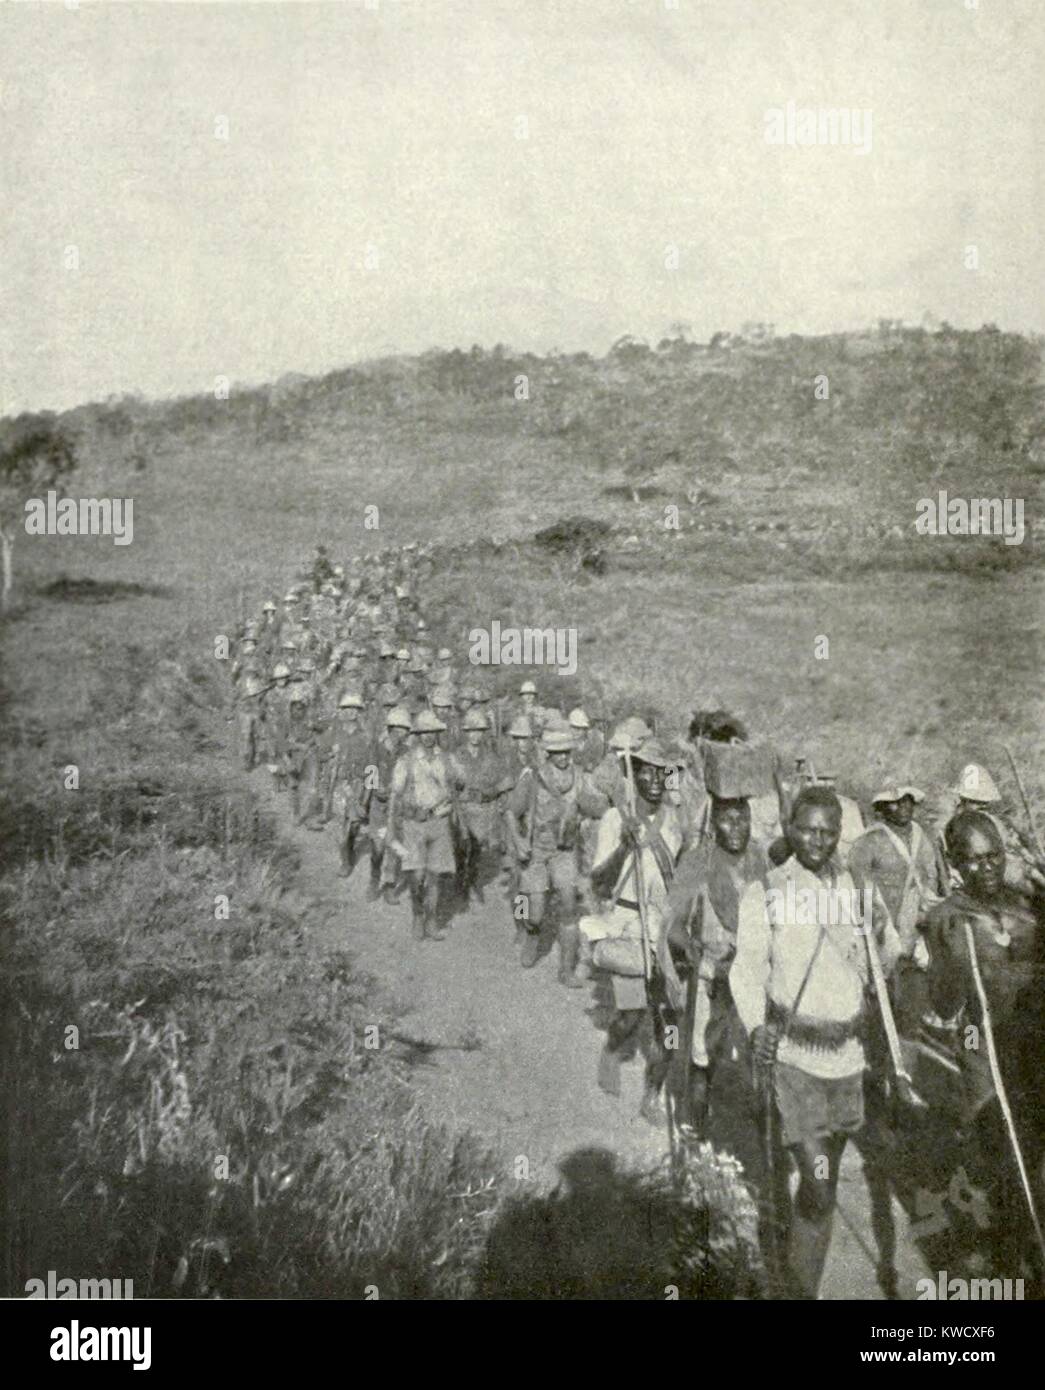 World War 1 in East Africa. British and Empire African soldiers on the march in 1917. They captured 2000 German colonial regulars and Askaris (African troops) and pushed the rest of General Von Lettows forces across the border into Portuguese Nyasaland. (BSLOC 2013 1 46) Stock Photo